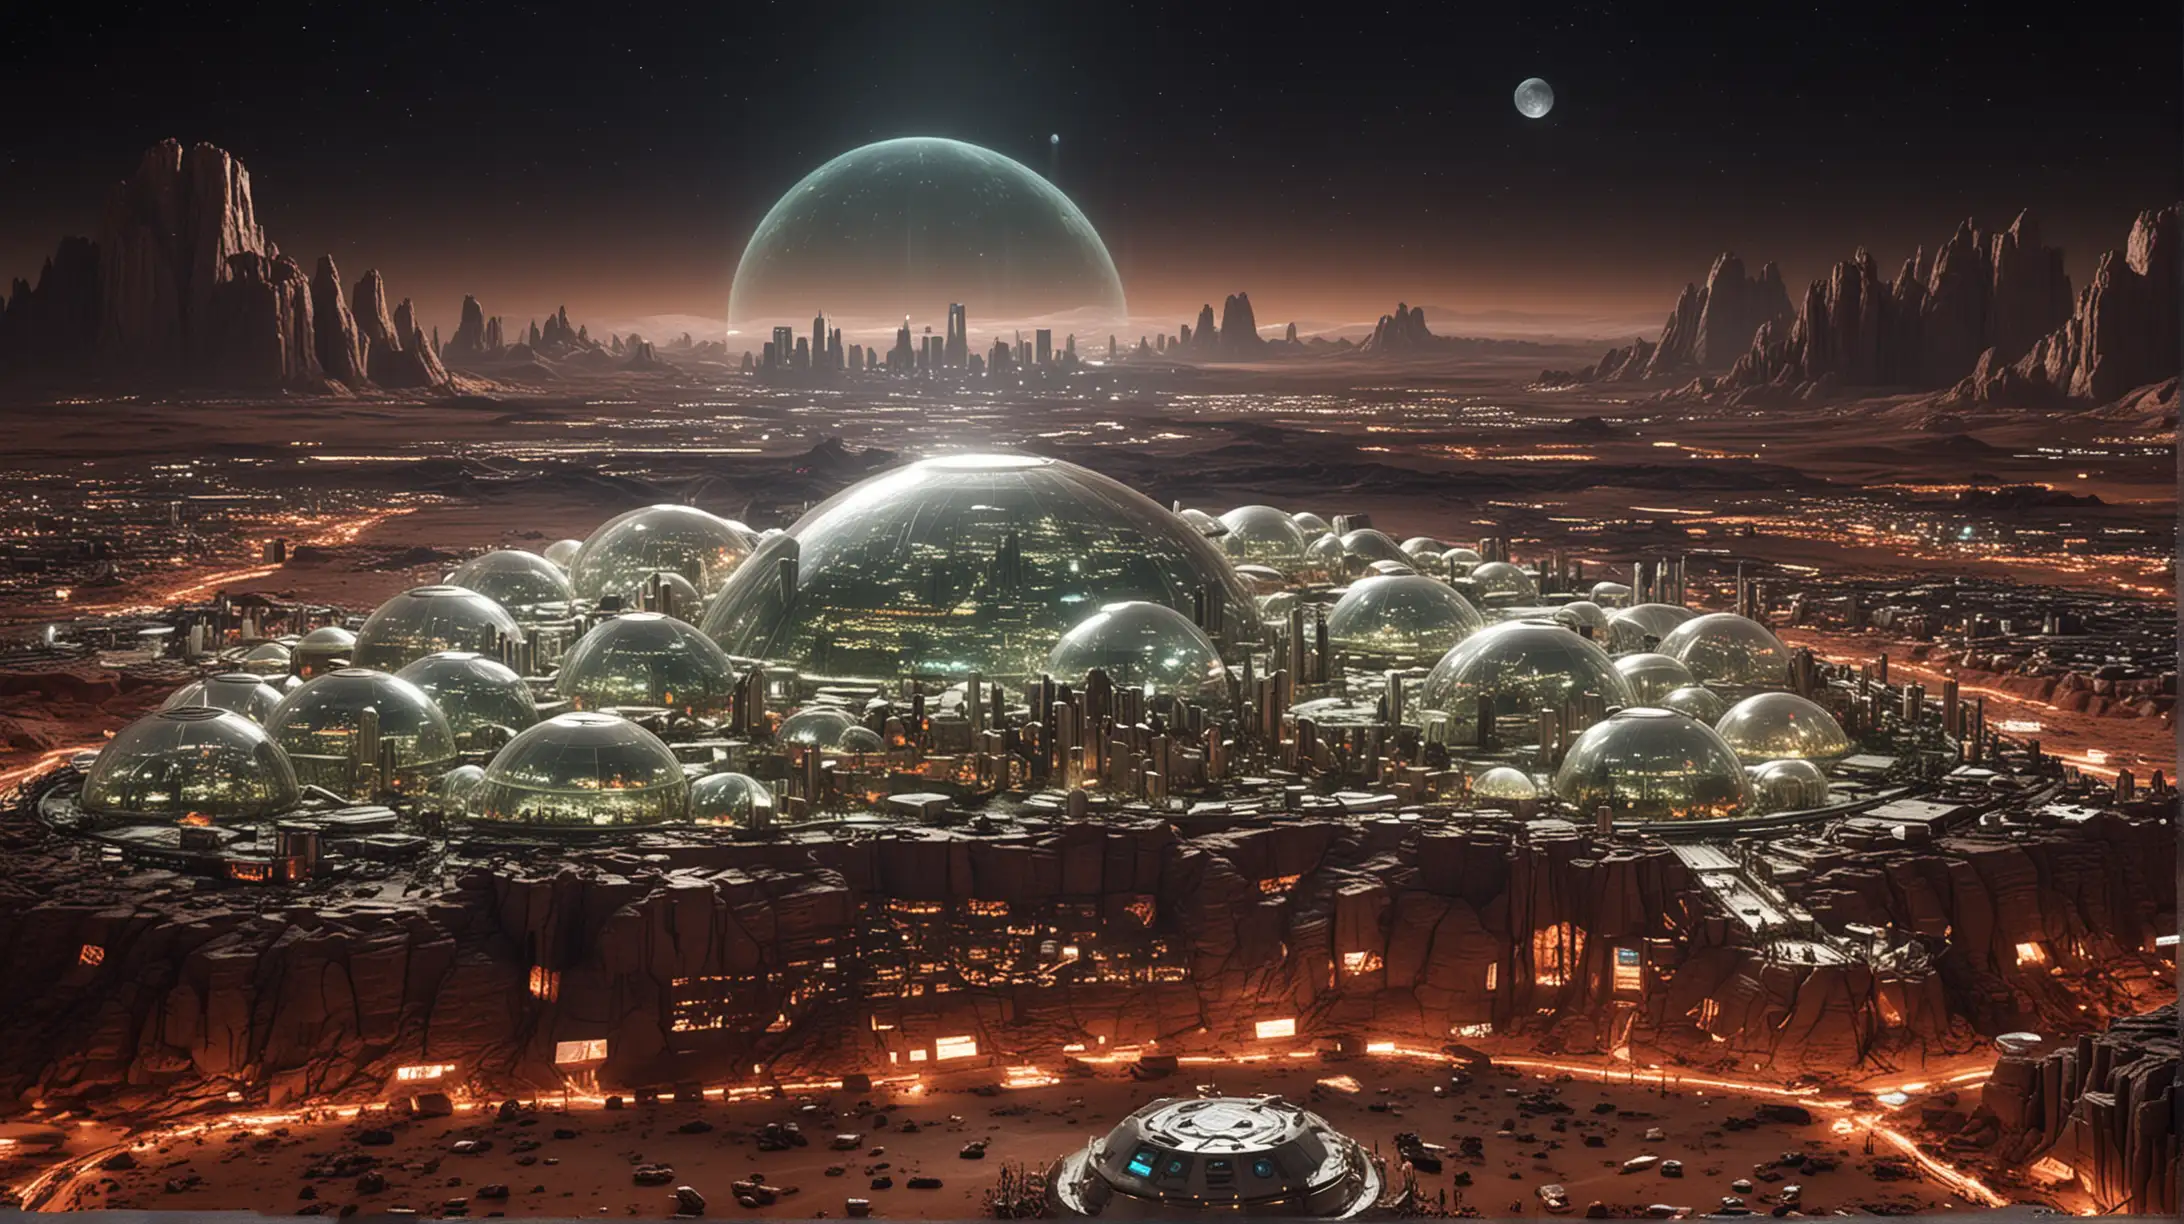 a giant glass dome, inside is far away night image of a massive sprawling domed mars colony mega-sized metropolis with neon lights and white skyscrapers ,white buildings, the city goes on as far as the eye can see to the horizon, the city is comprised of hexagonal glass domes, the Martian surface is like a rocky desert with small amounts of greenery